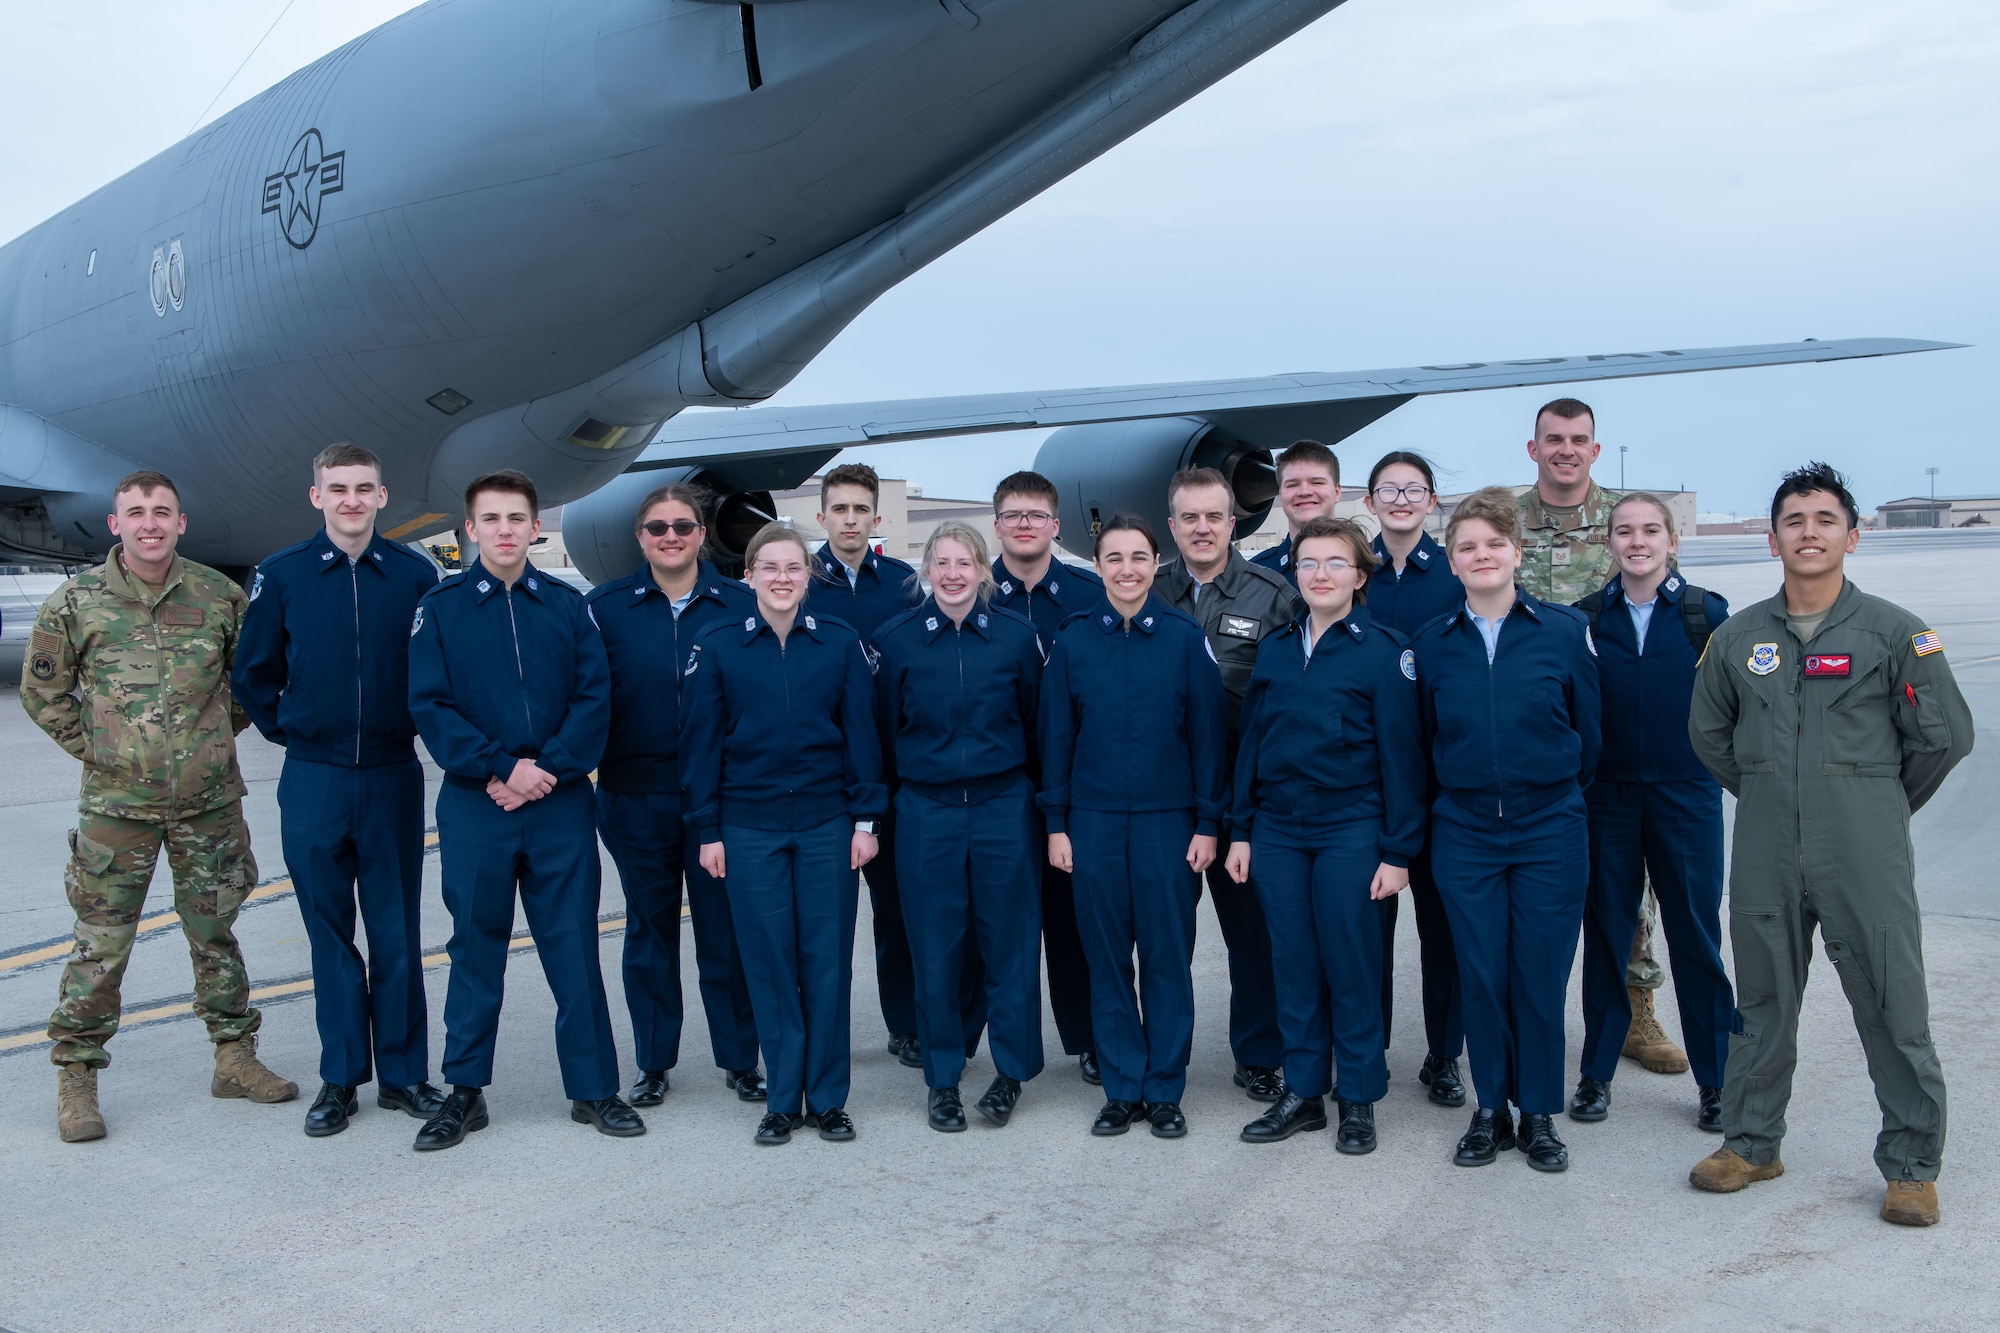 Students with the Douglas High School Air Force Junior Reserve Officer Training Corps (JROTC) pose for a group photo with active-duty Airmen on Ellsworth Air Force Base, S.D., April 19, 2022.  The JROTC students took the opportunity to ride a KC-135 Stratotanker during an airborne refueling exercise with B-1B Lancers. (U.S. Air Force Photo by Airman 1st Class Adam Olson)